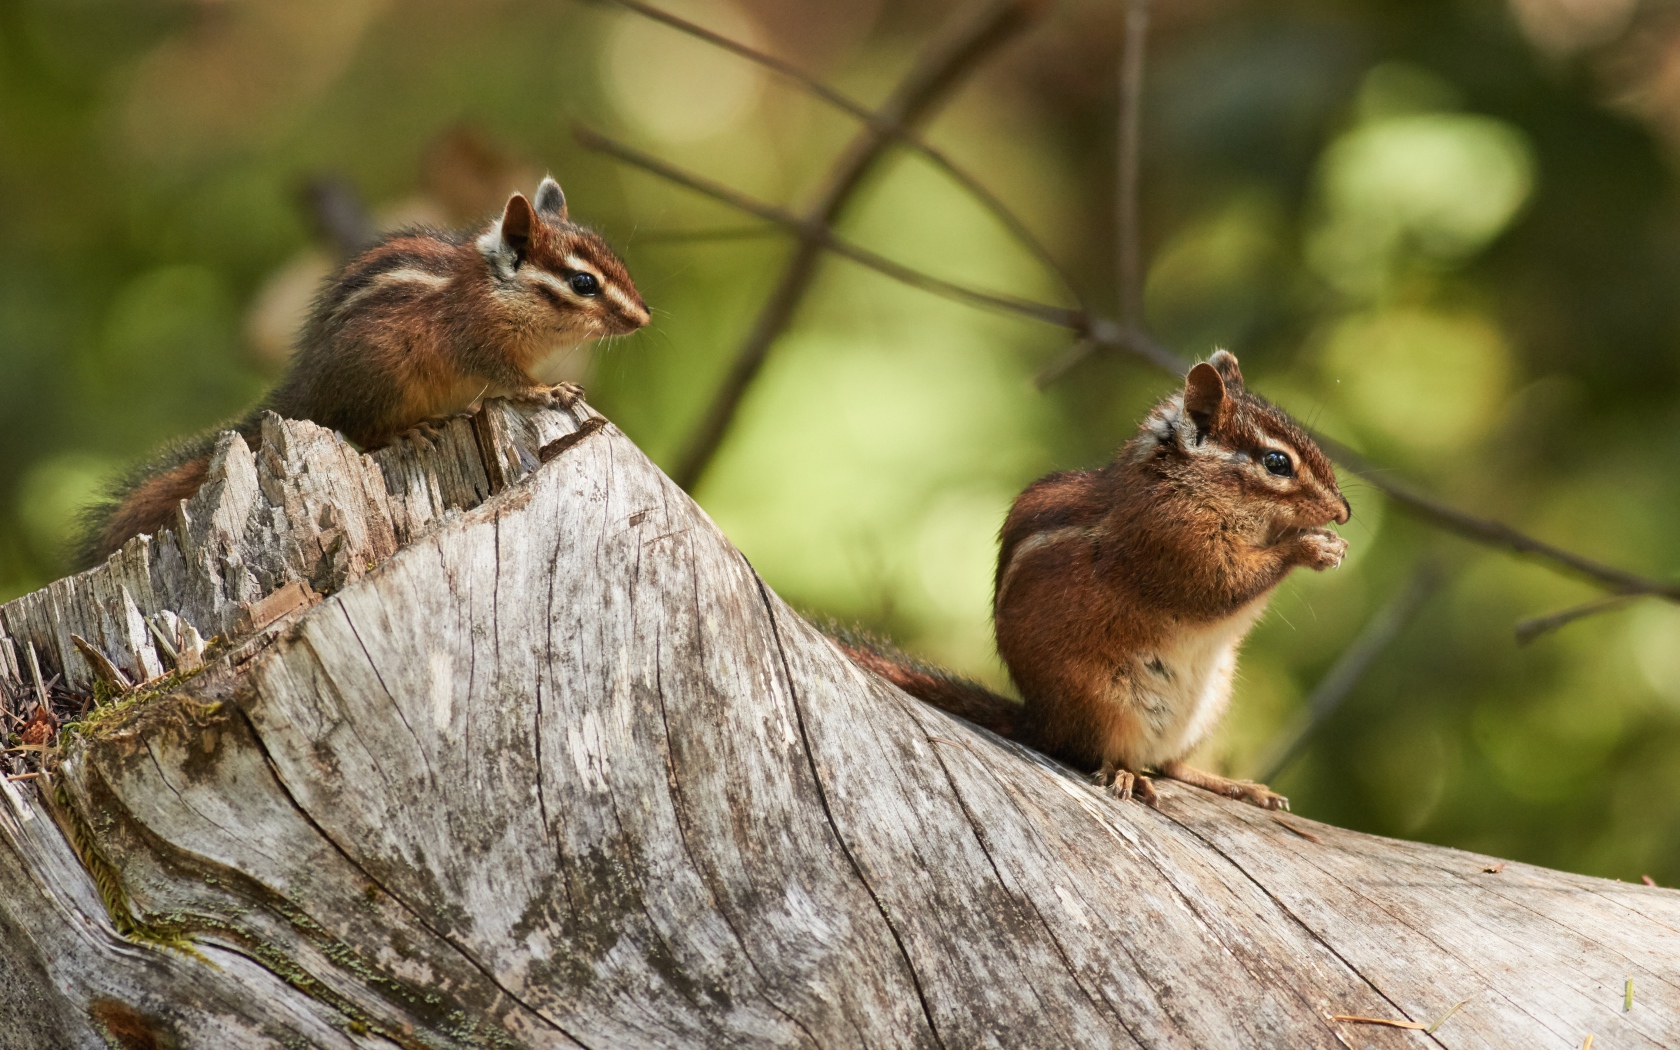 Two little chipmunks are sitting on a dry tree